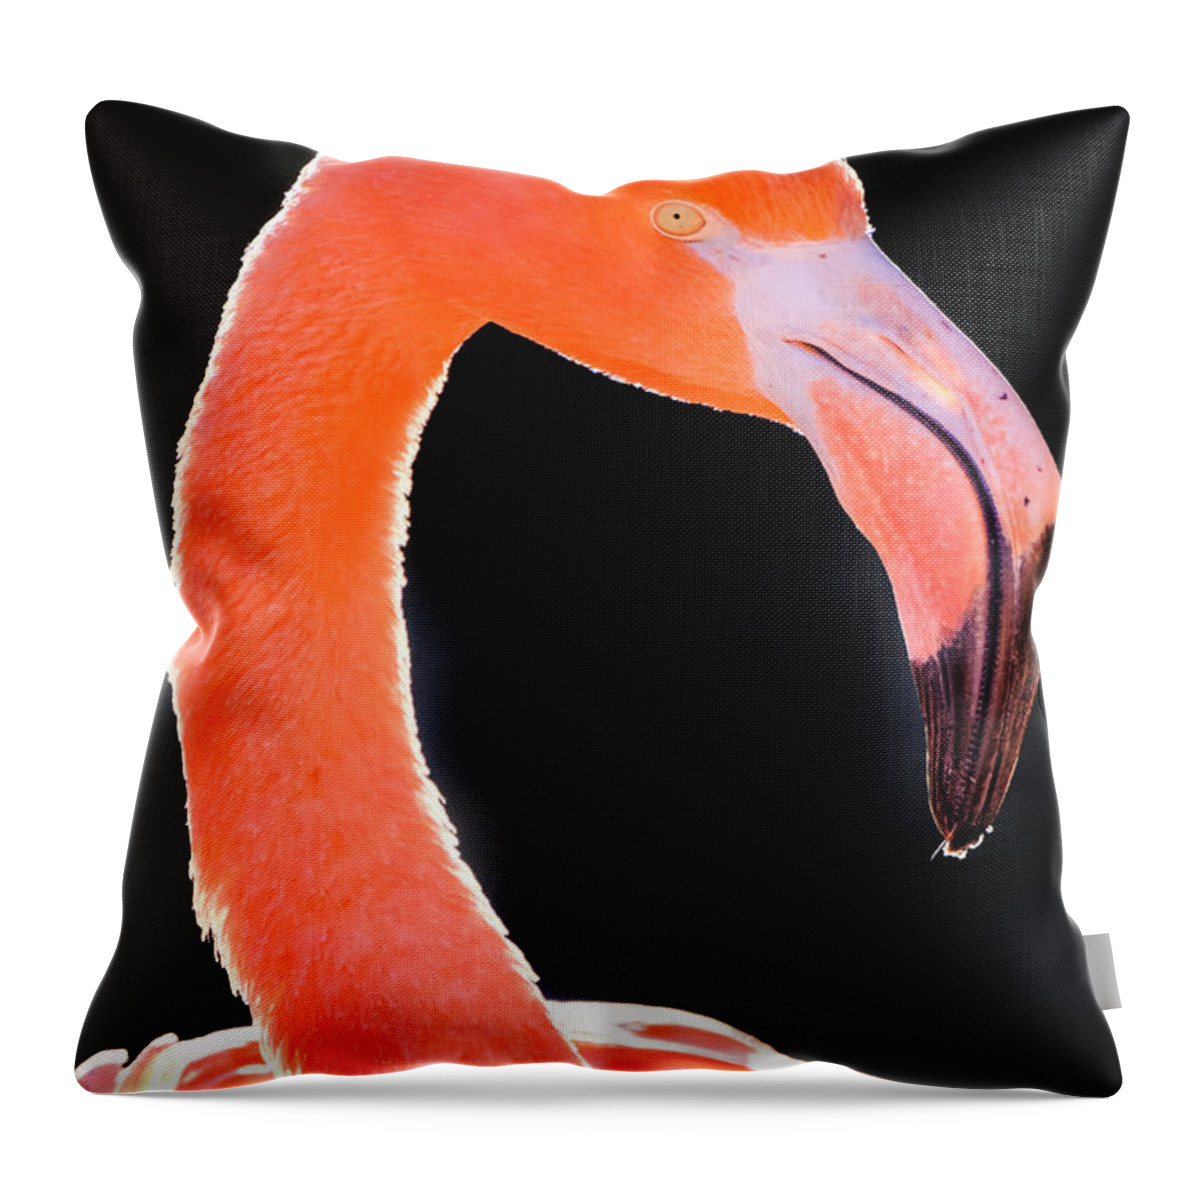 Bird Photography Throw Pillow featuring the photograph Flamingo by Nicole Young